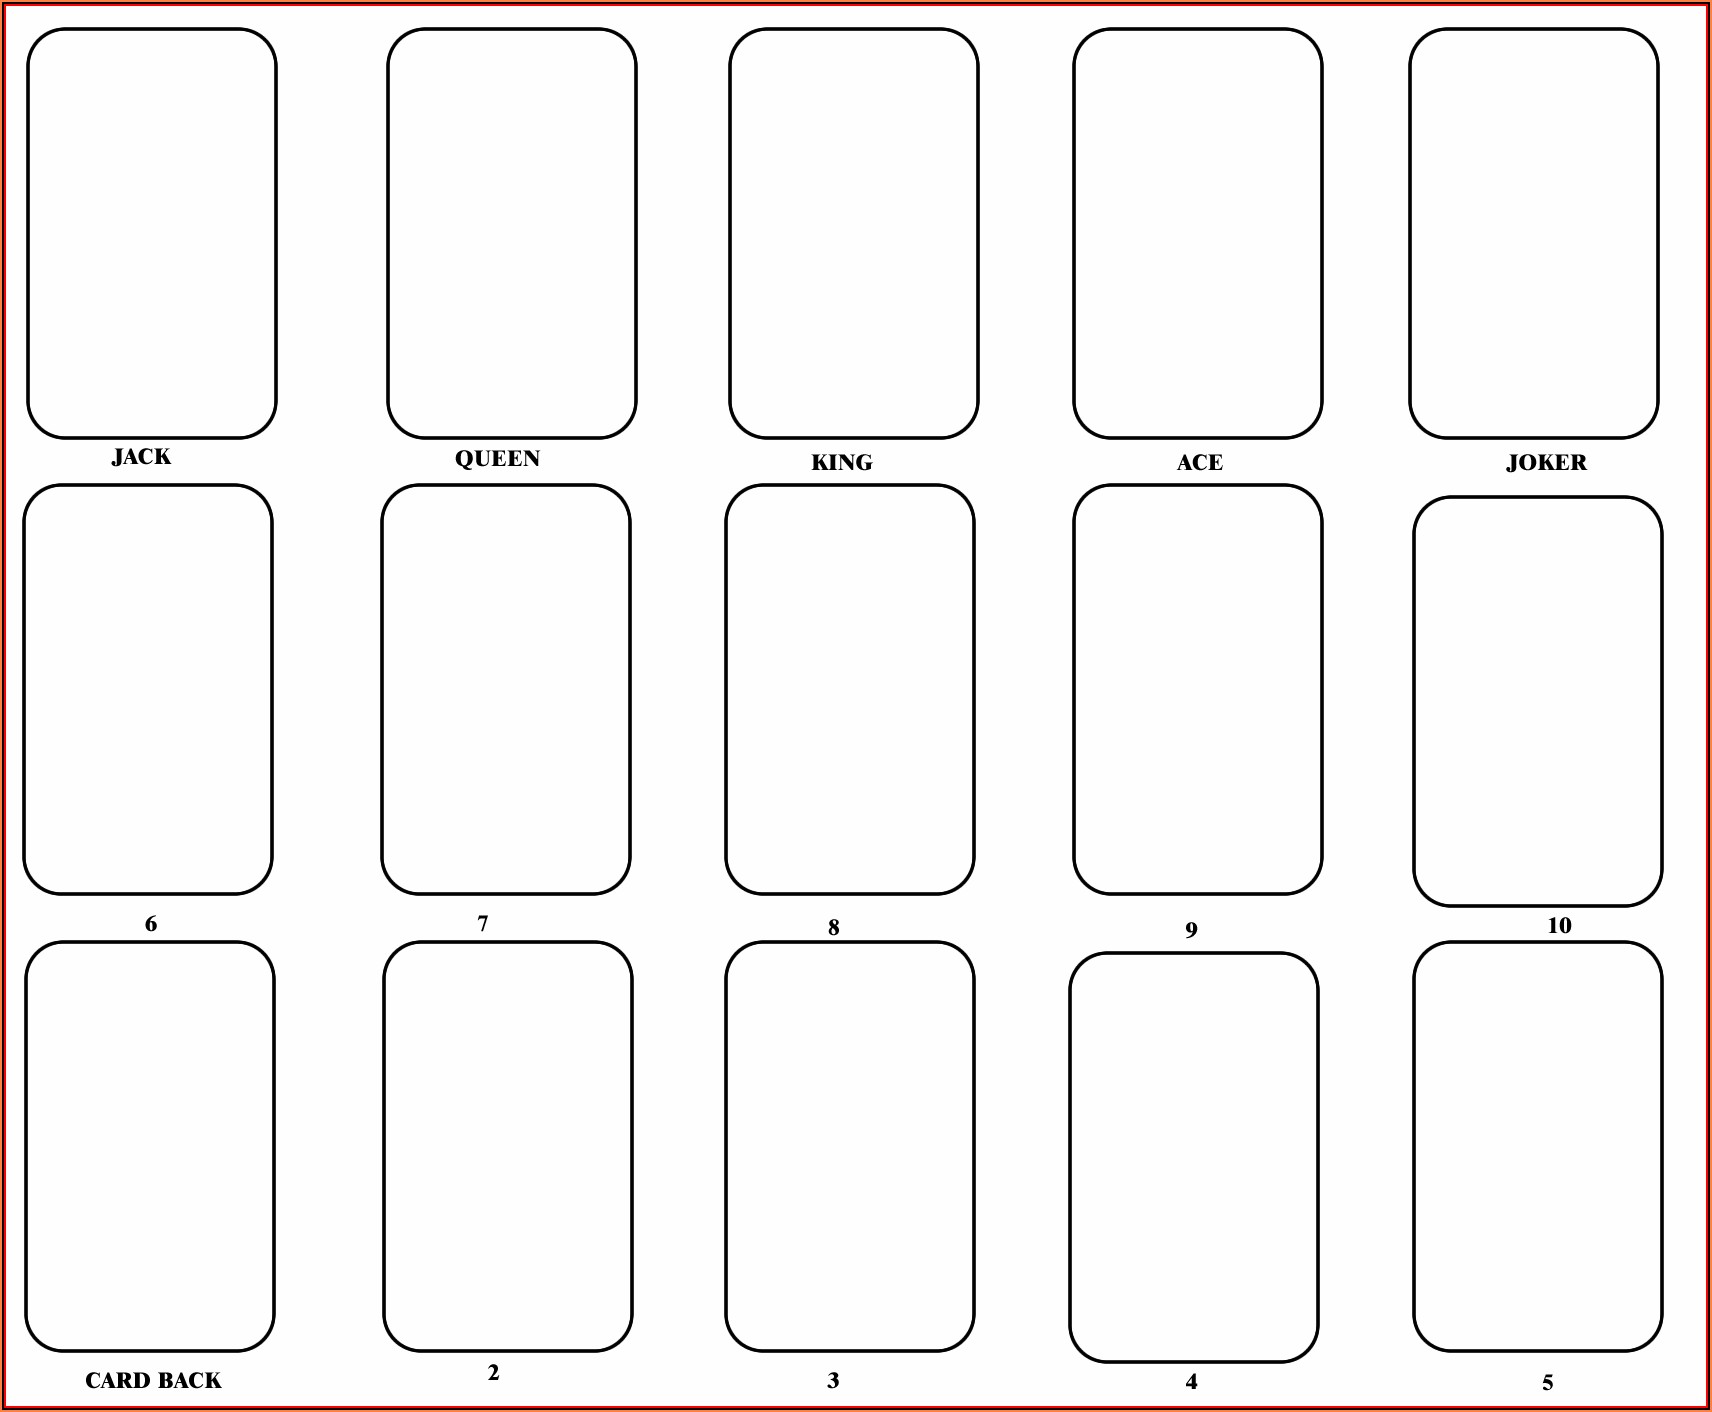 blank-flash-card-template-template-1-resume-examples-e79qqx79kq